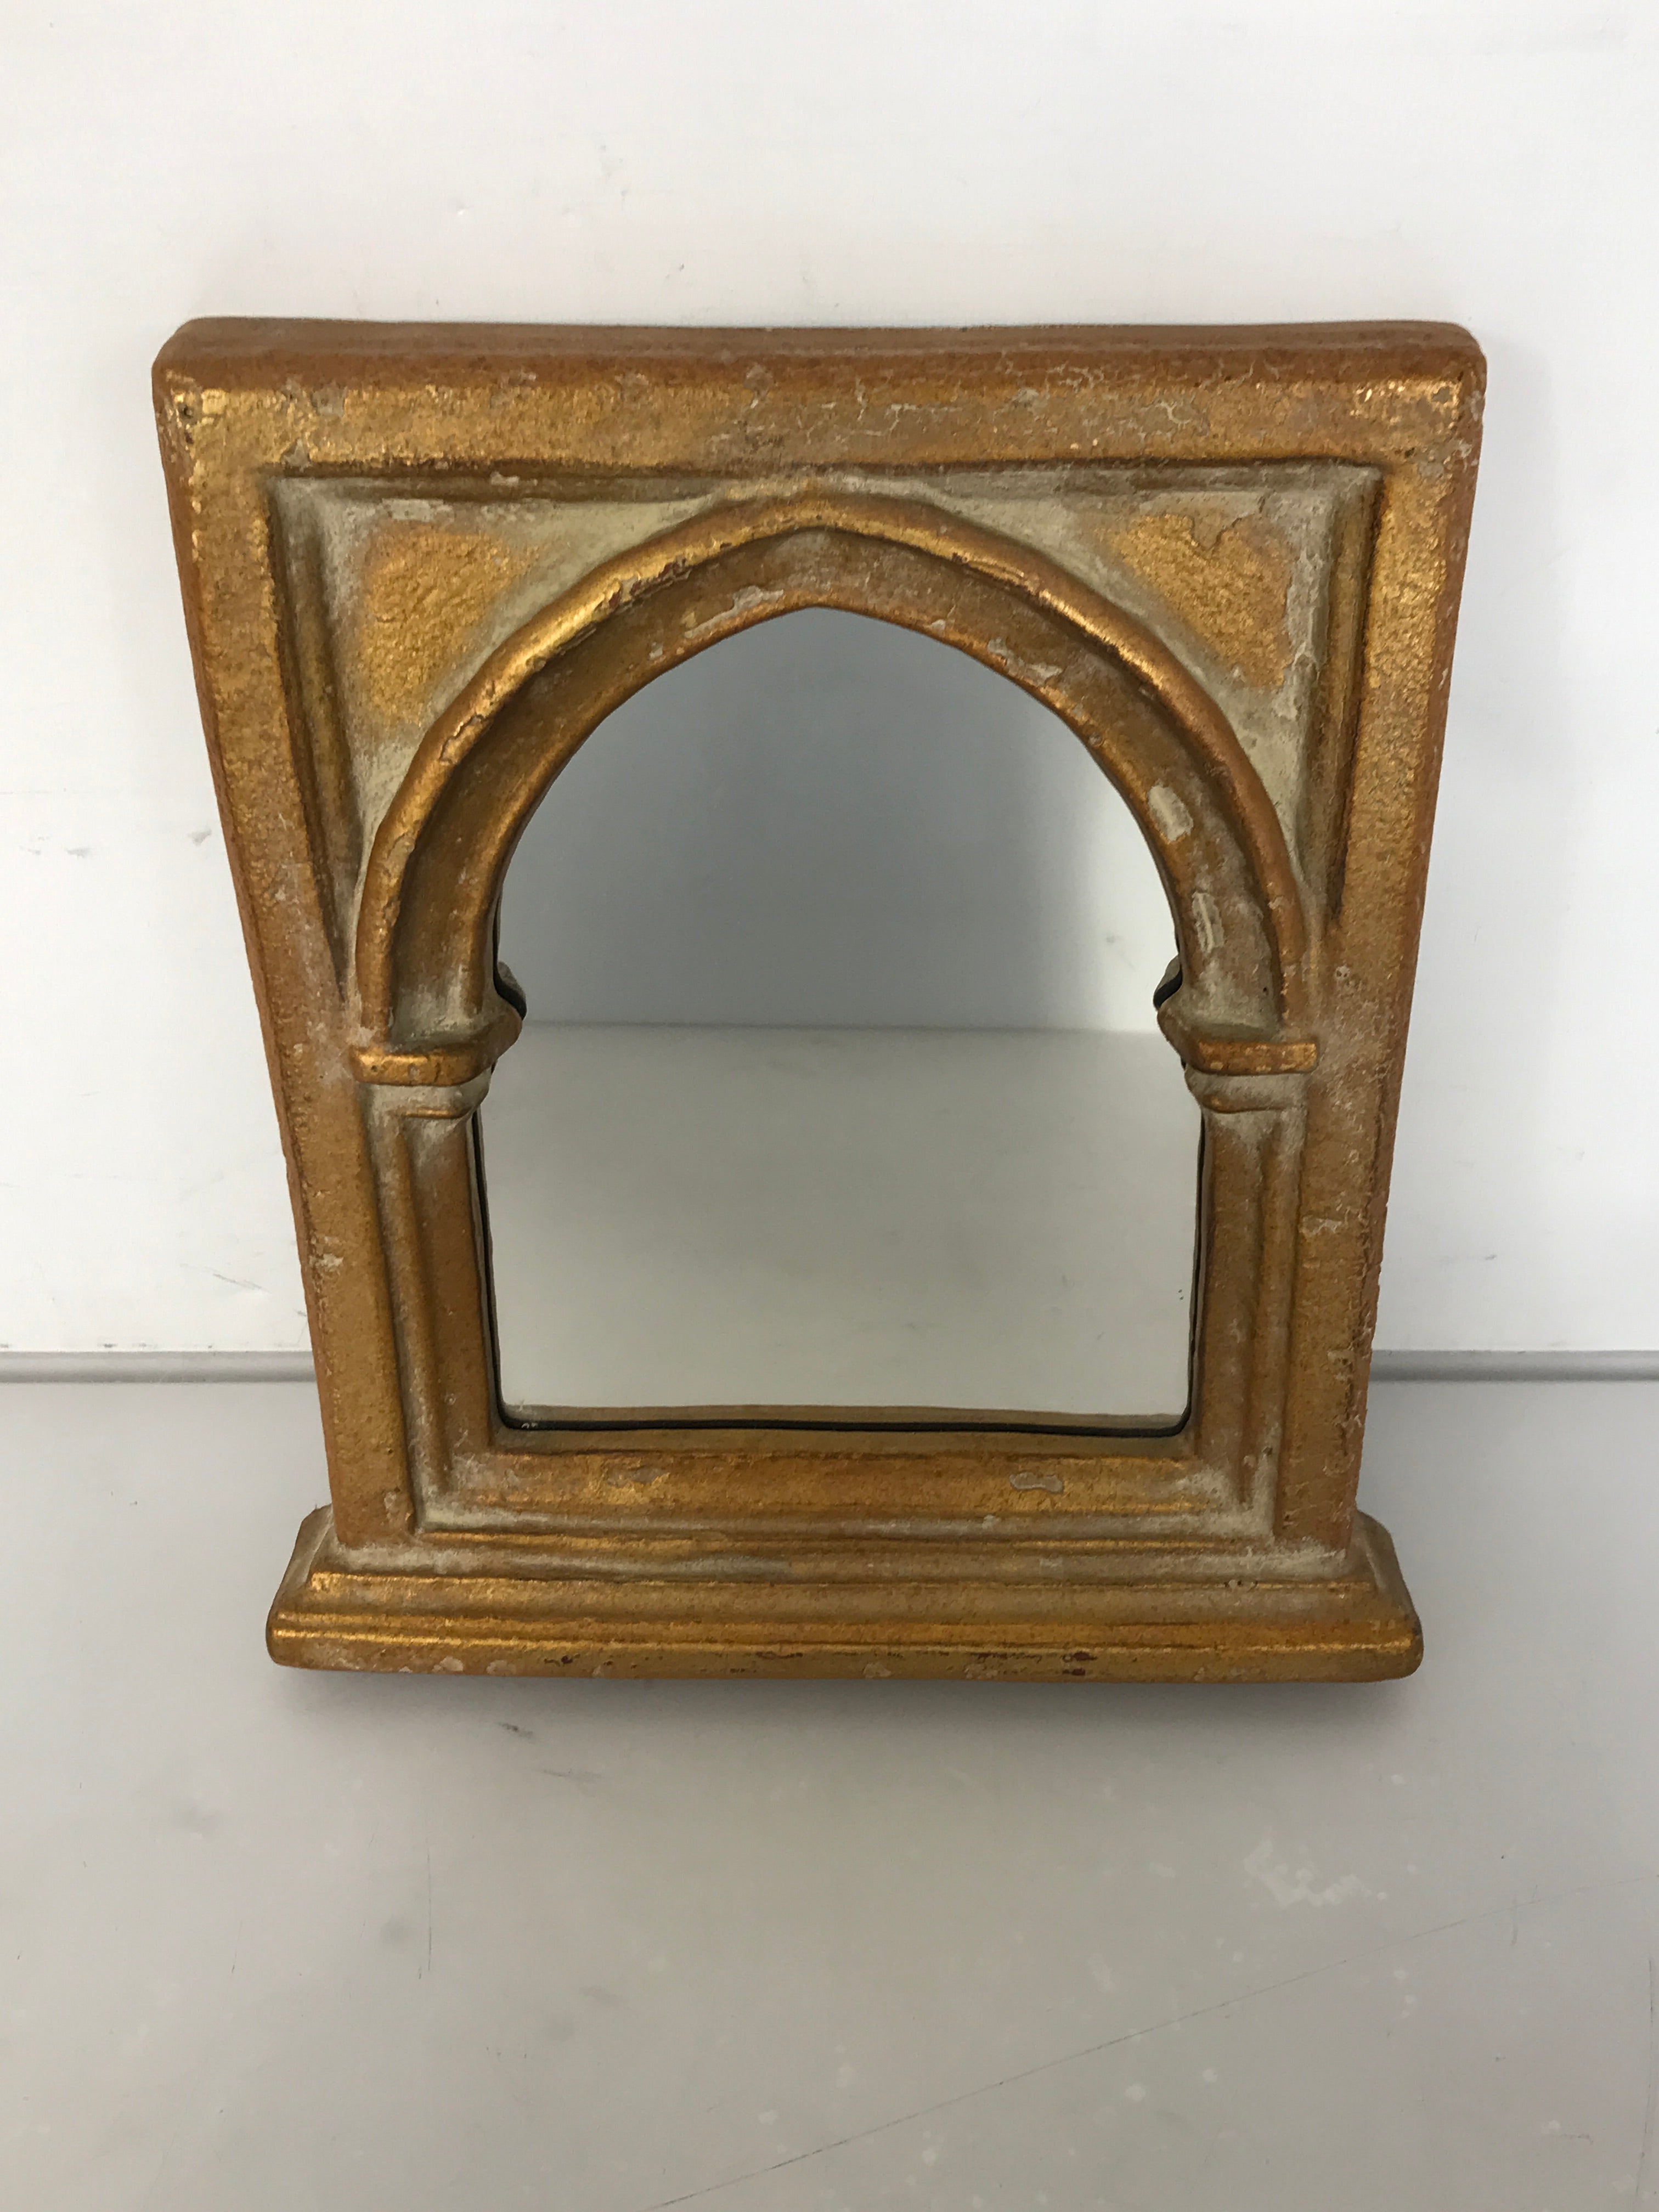 Kulicke Collection Gold Mirror "Gothic Arch in Rectangular Frame"